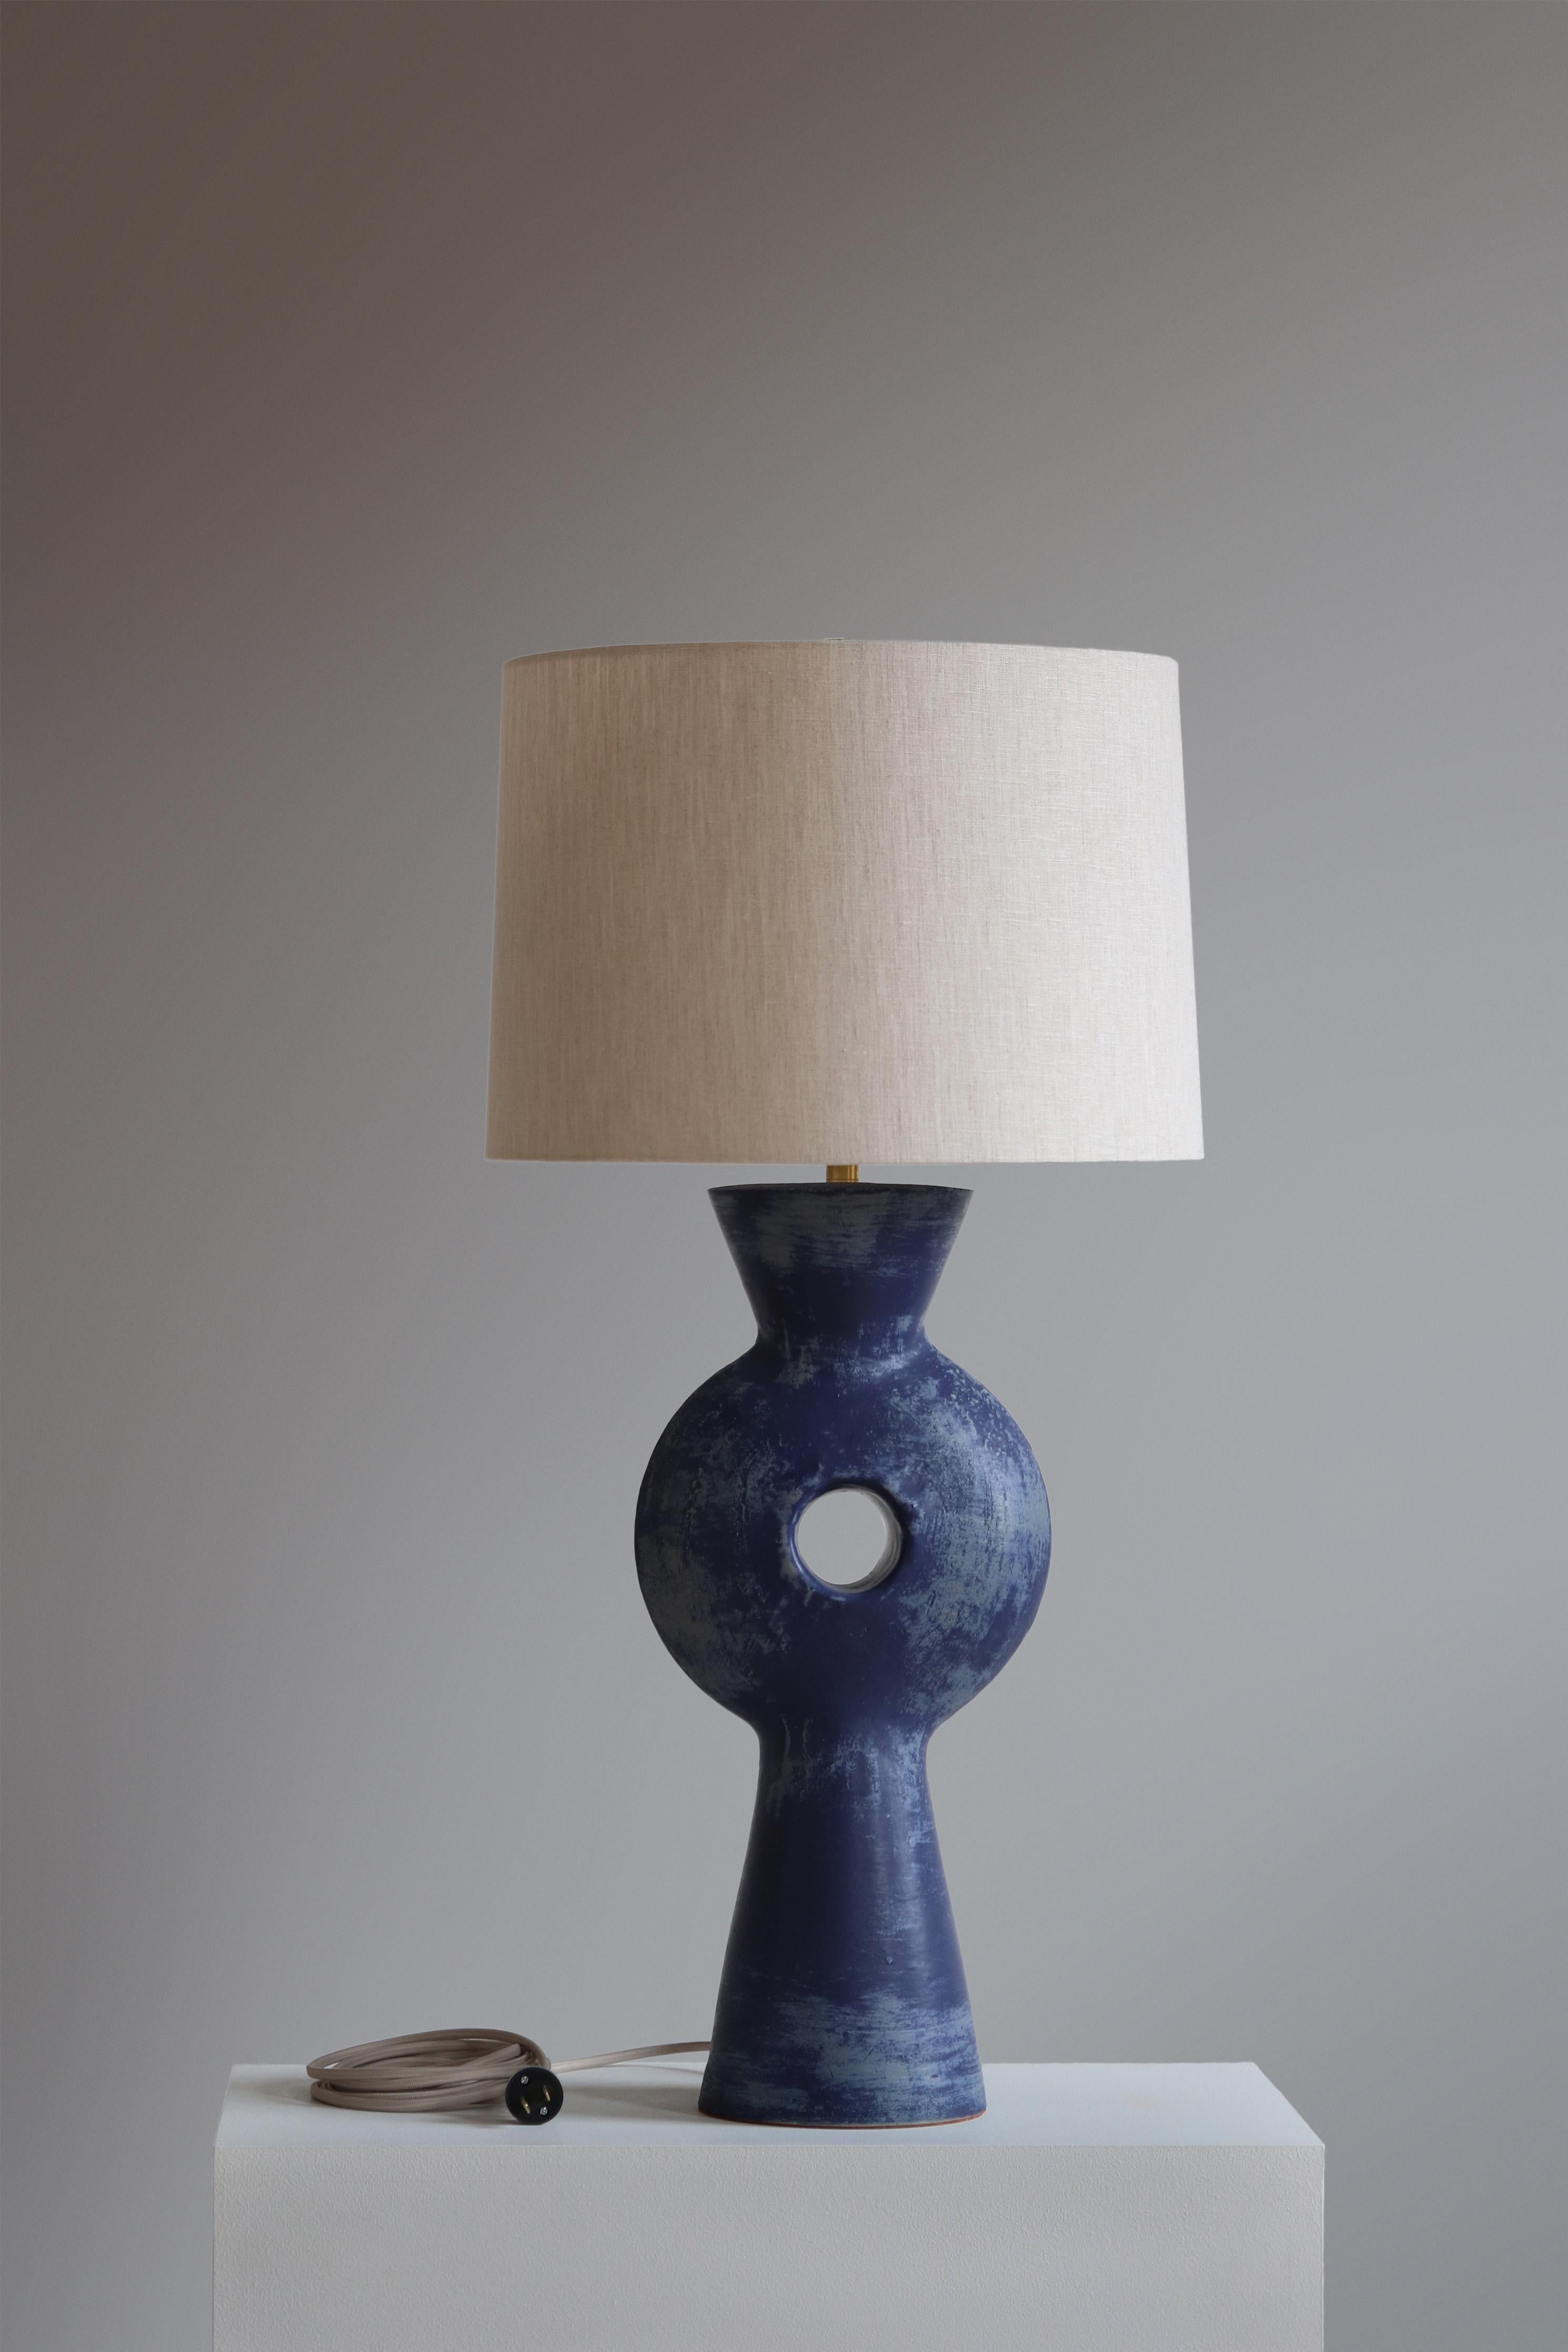 Lapis Linus Table Lamp by Danny Kaplan Studio
Dimensions: ⌀ 41 x H 82 cm
Materials: Glazed Ceramic, Unfinished Brass, Linen

This item is handmade, and may exhibit variability within the same piece. We do our best to maintain a consistent product,